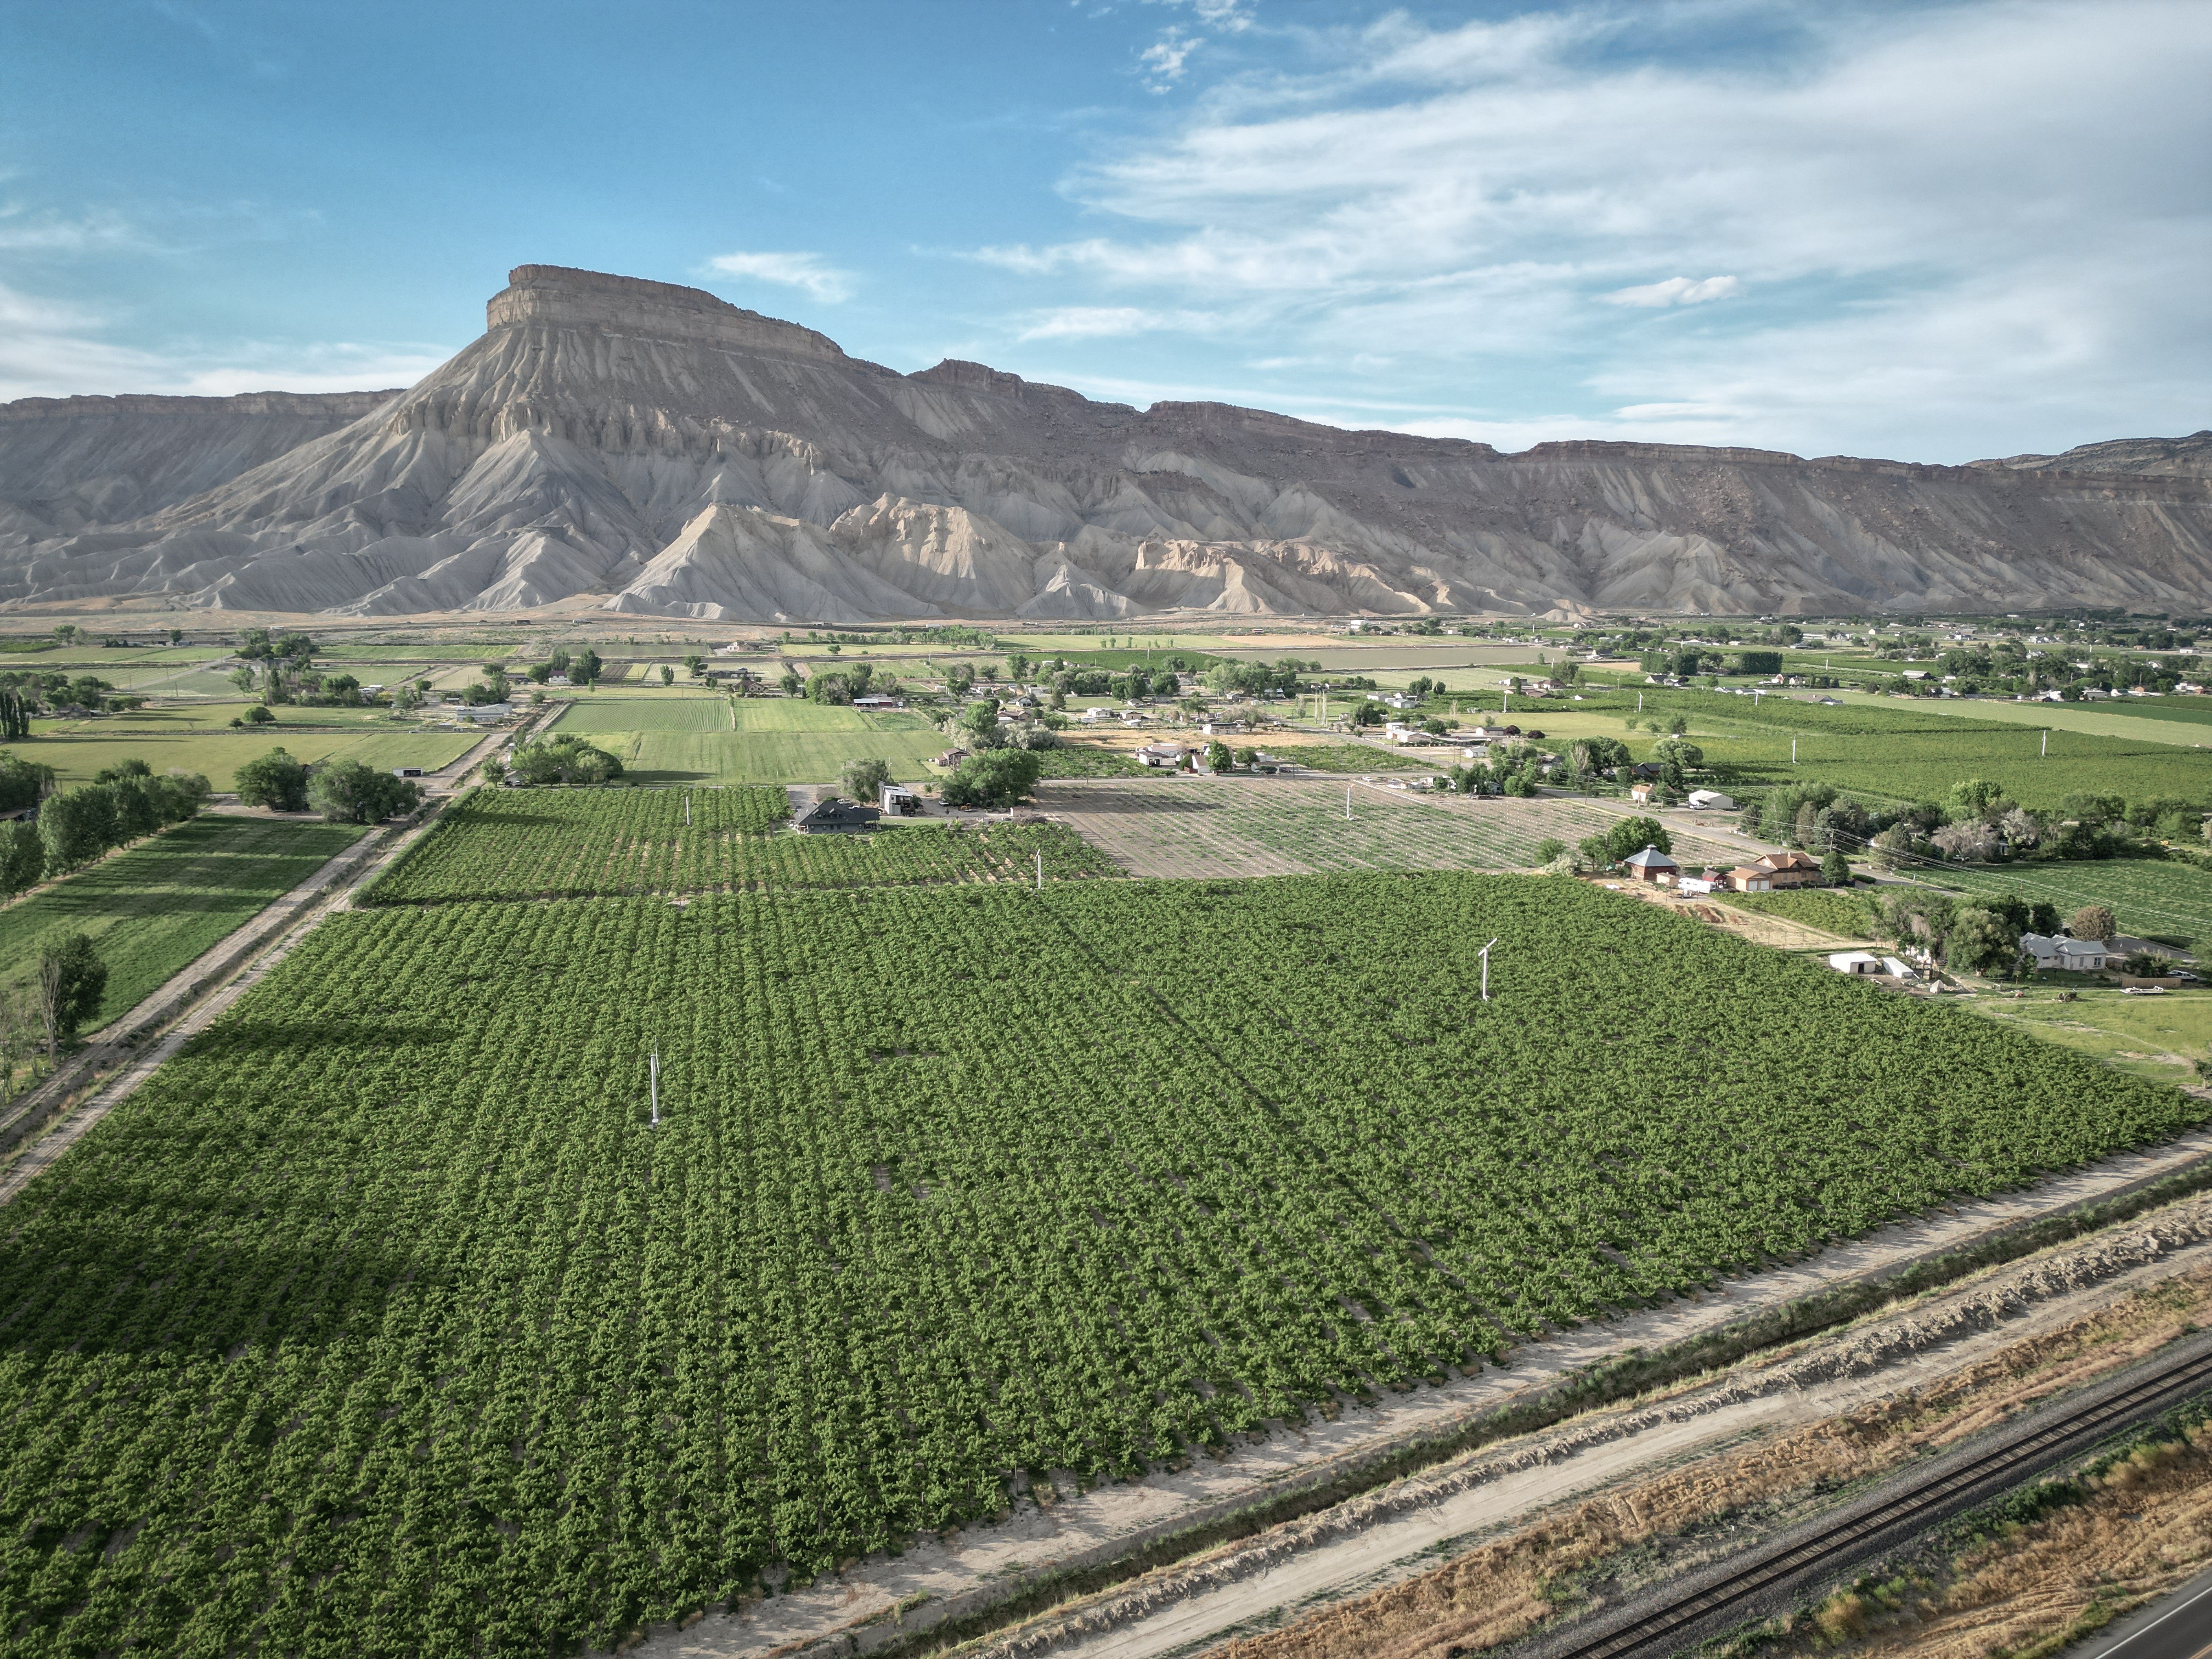 Mount Garfield over Palisade orchards and vineyards